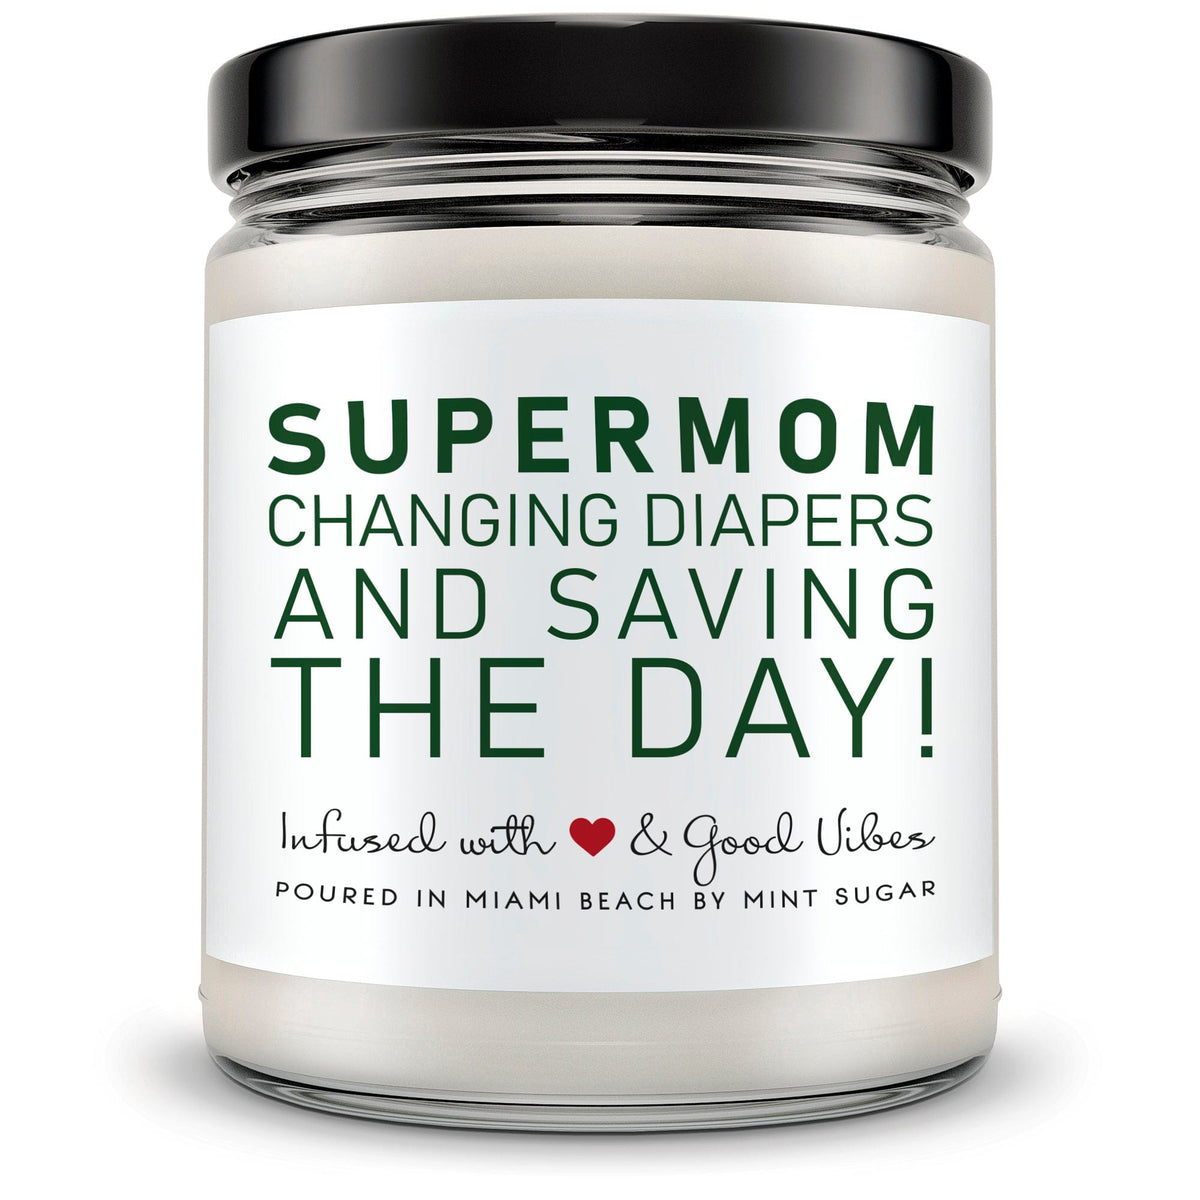 Supermom Changing Diapers and Saving The Day! - Mint Sugar Candle